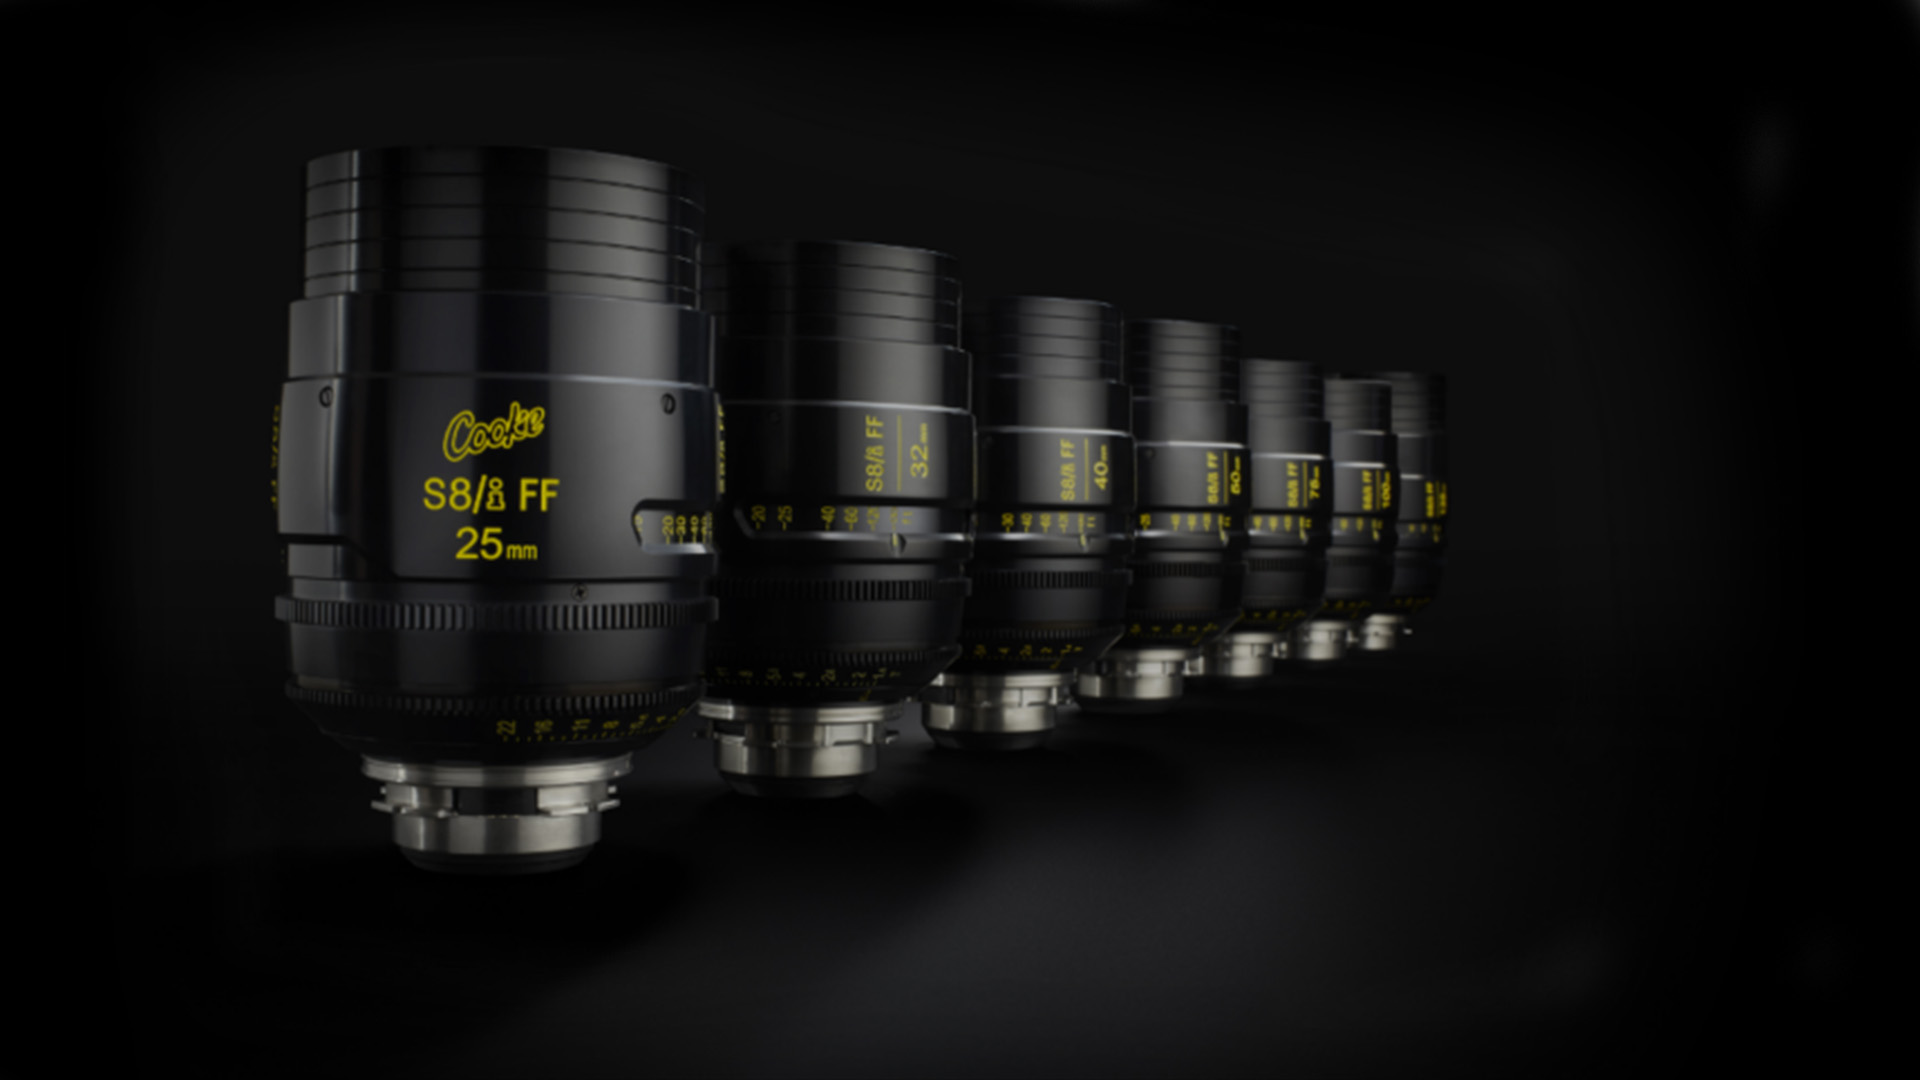 The Cooke S8/I range of lenses are 'all-spherical' with no aspherical elements.